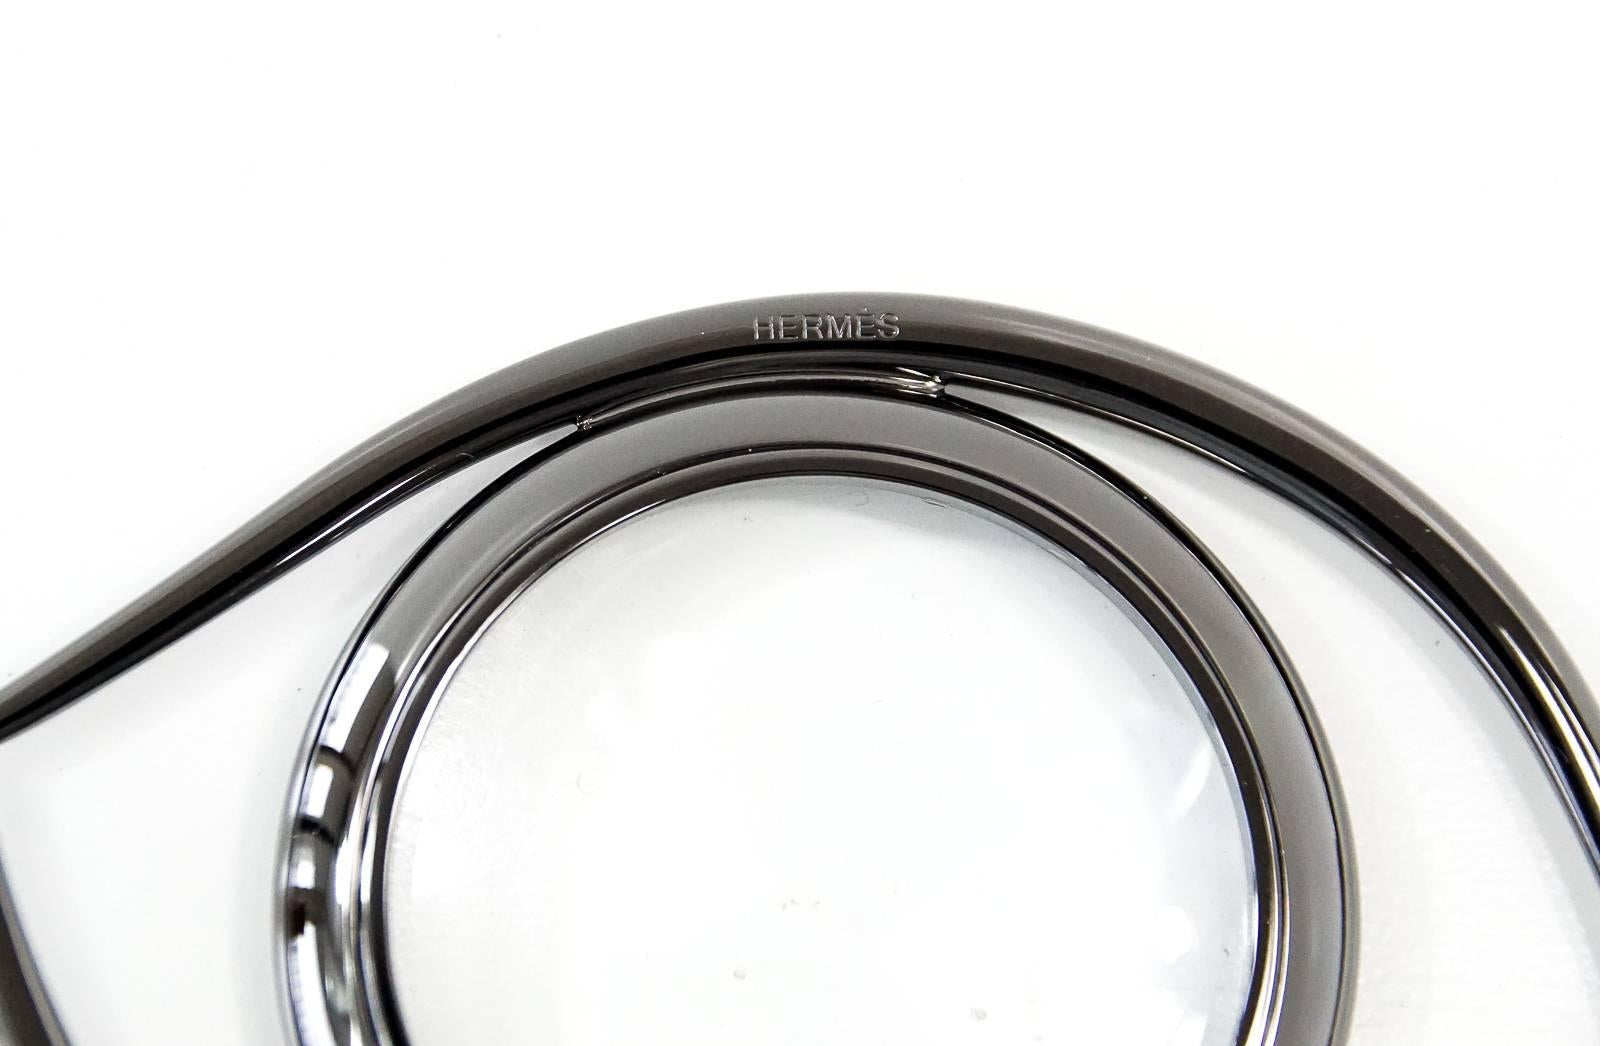 Mightychic offers an Hermes Eye of Cleopatra magnifying glass / paperweight in ruthenium finished brass.
Beautiful blend of form and function, originally designed in the 60's by renowned French writer and film maker Jean Cocteau.
Comes with